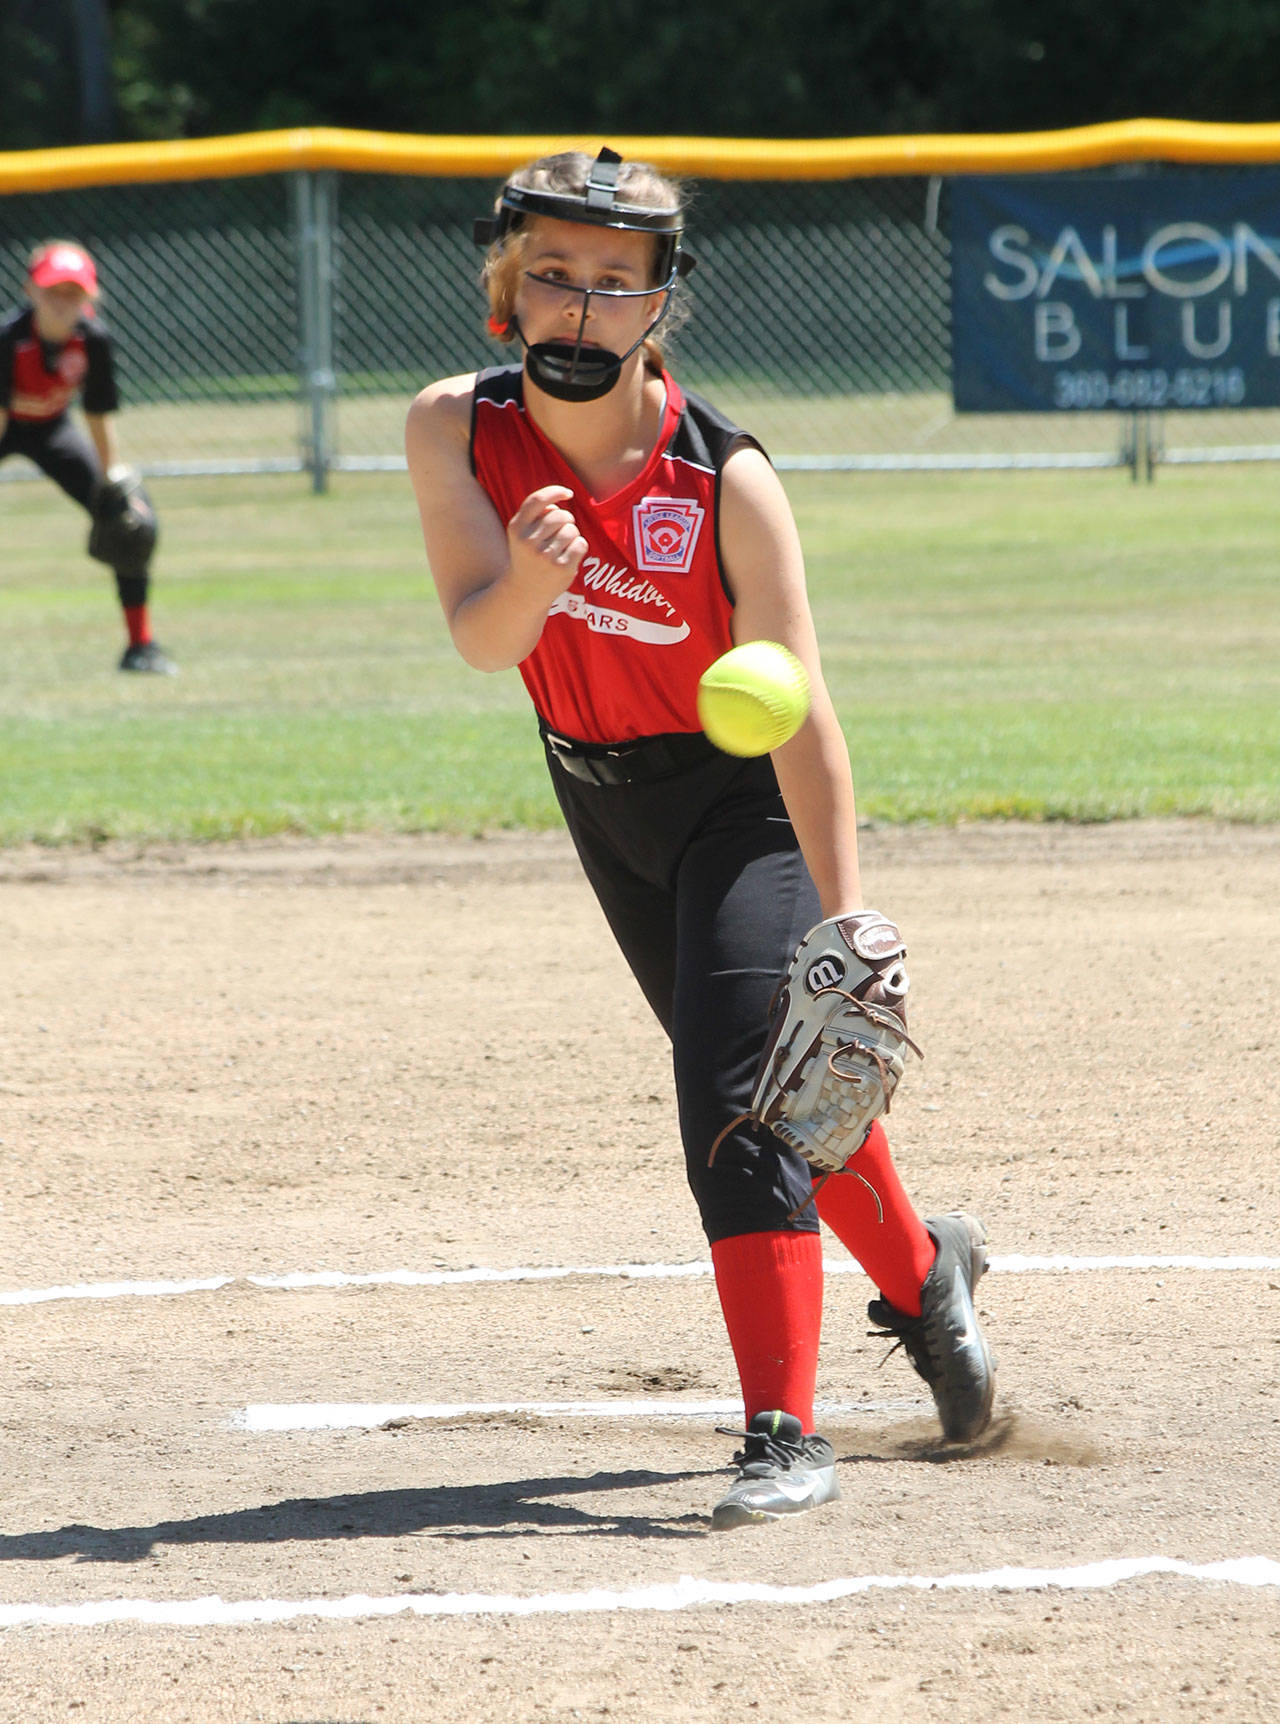 Chloe Marzocca tosses a strike.(Photo by Jim Waller/Whidbey News-Times)